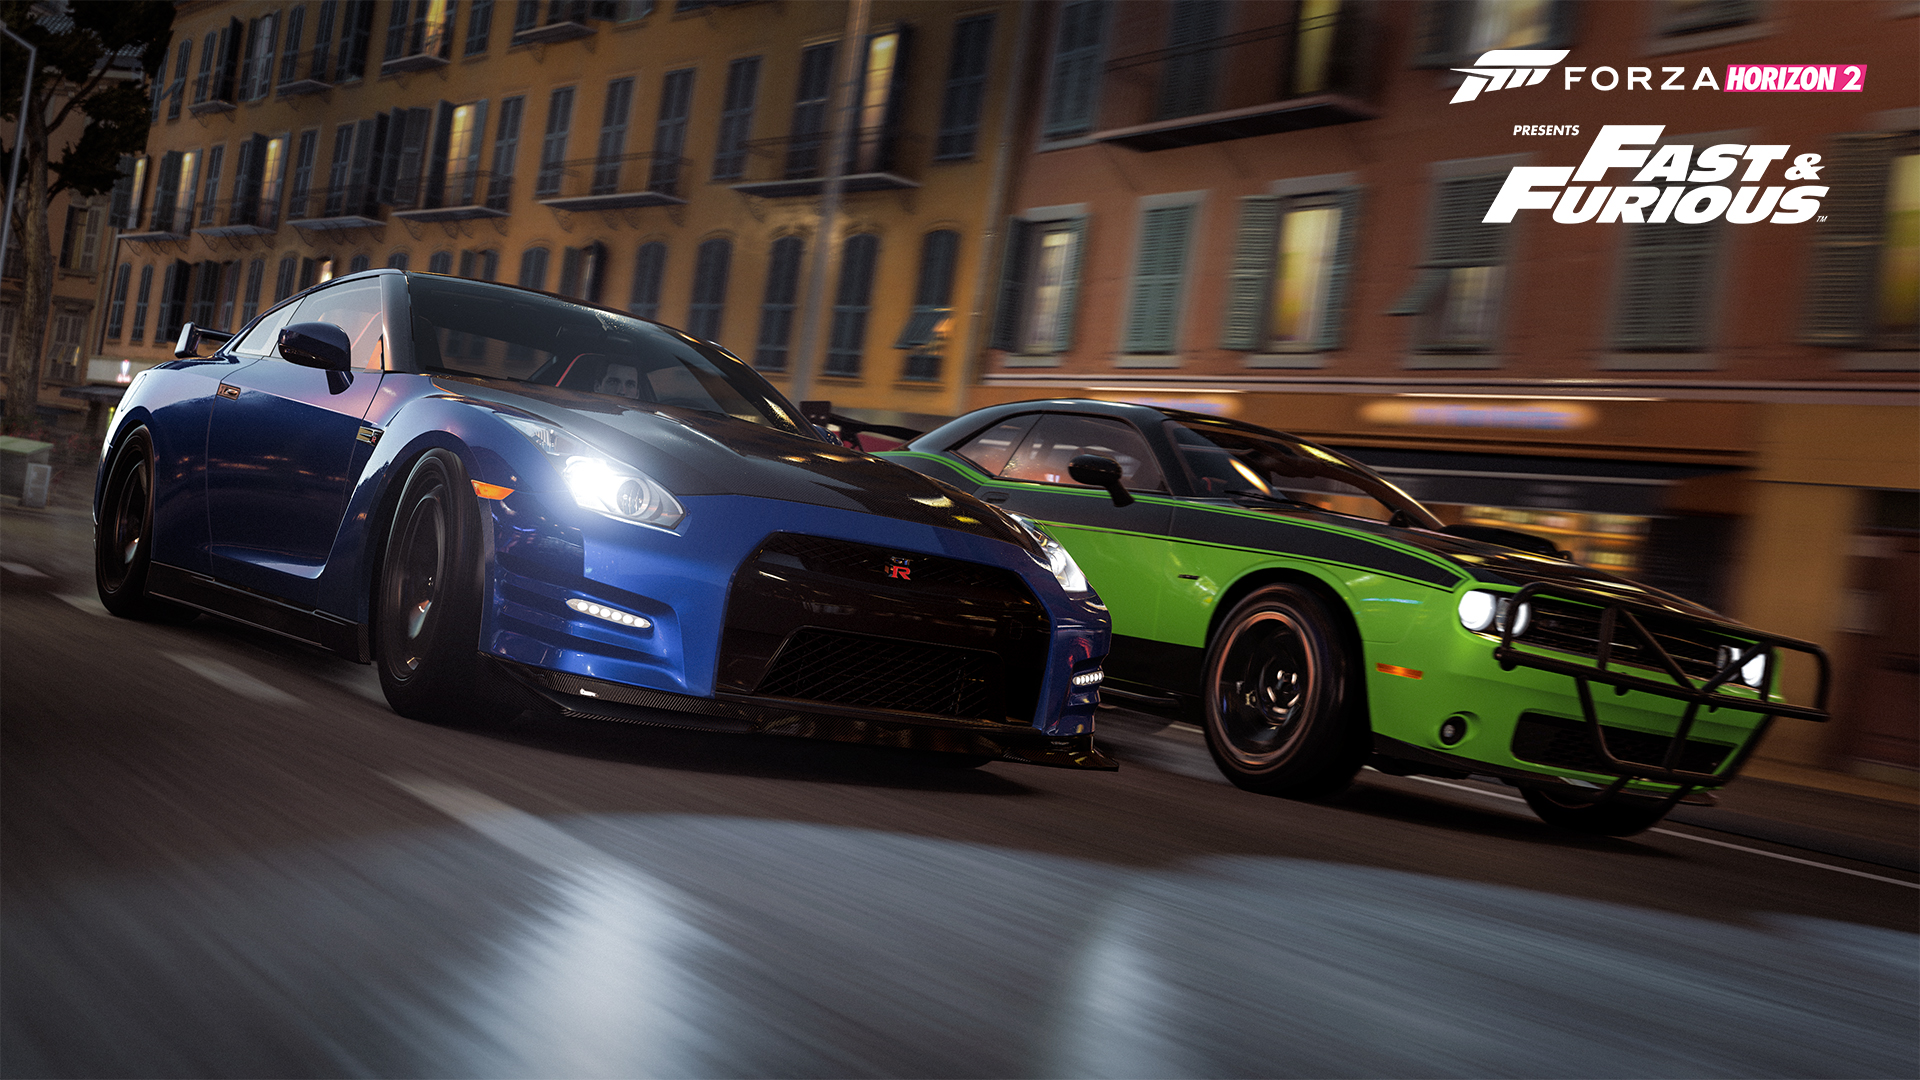 Video For Forza Horizon 2 Presents Fast & Furious Expansion Available for Free for a Limited Time